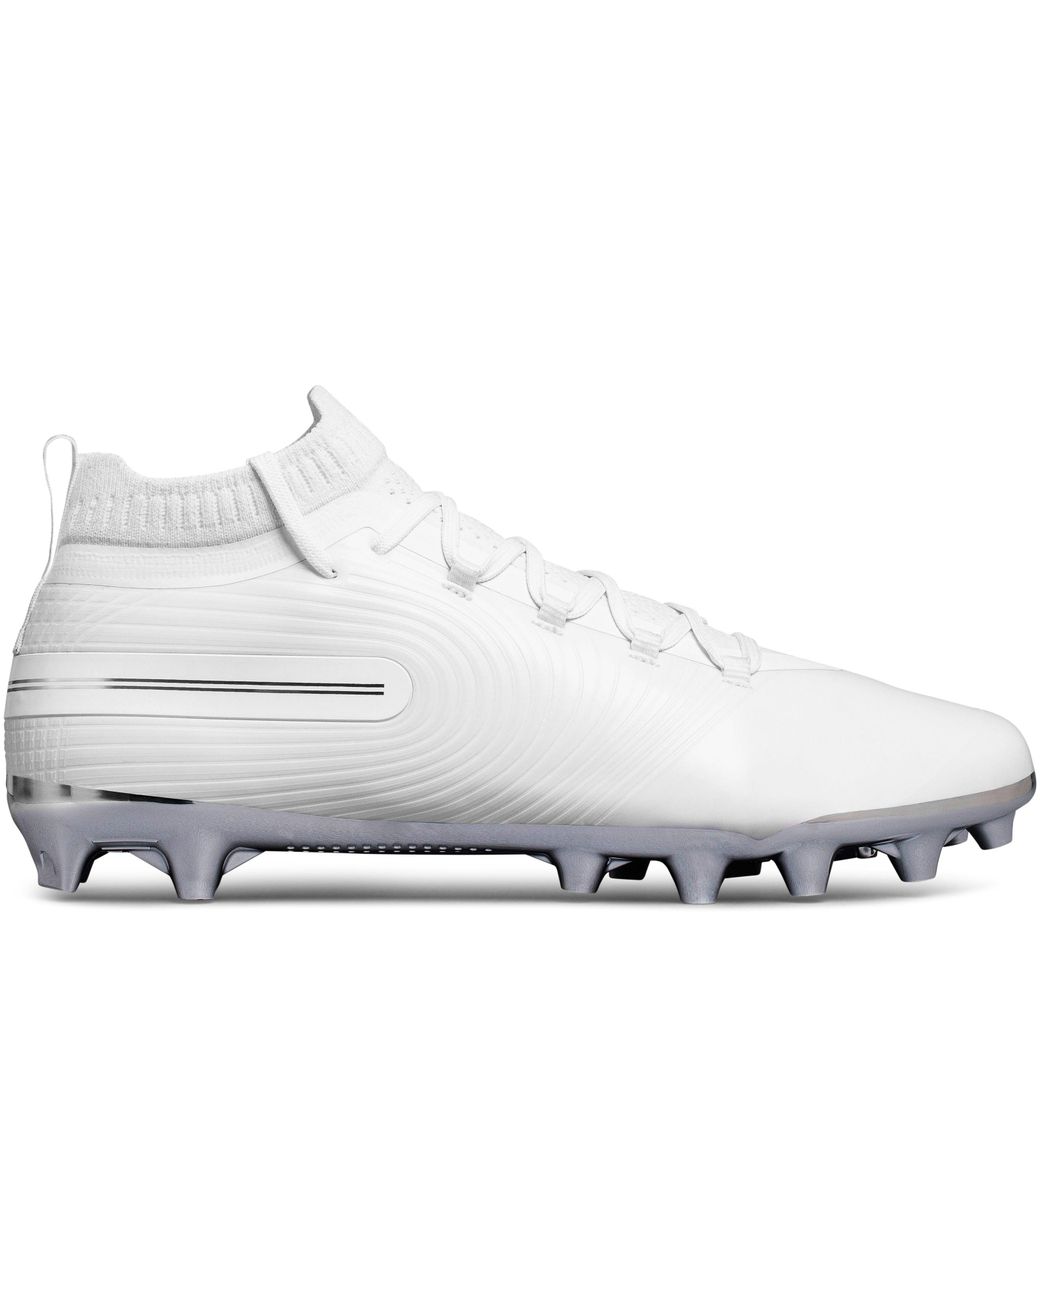 Under Armour Spotlight Football Cleats White | vlr.eng.br